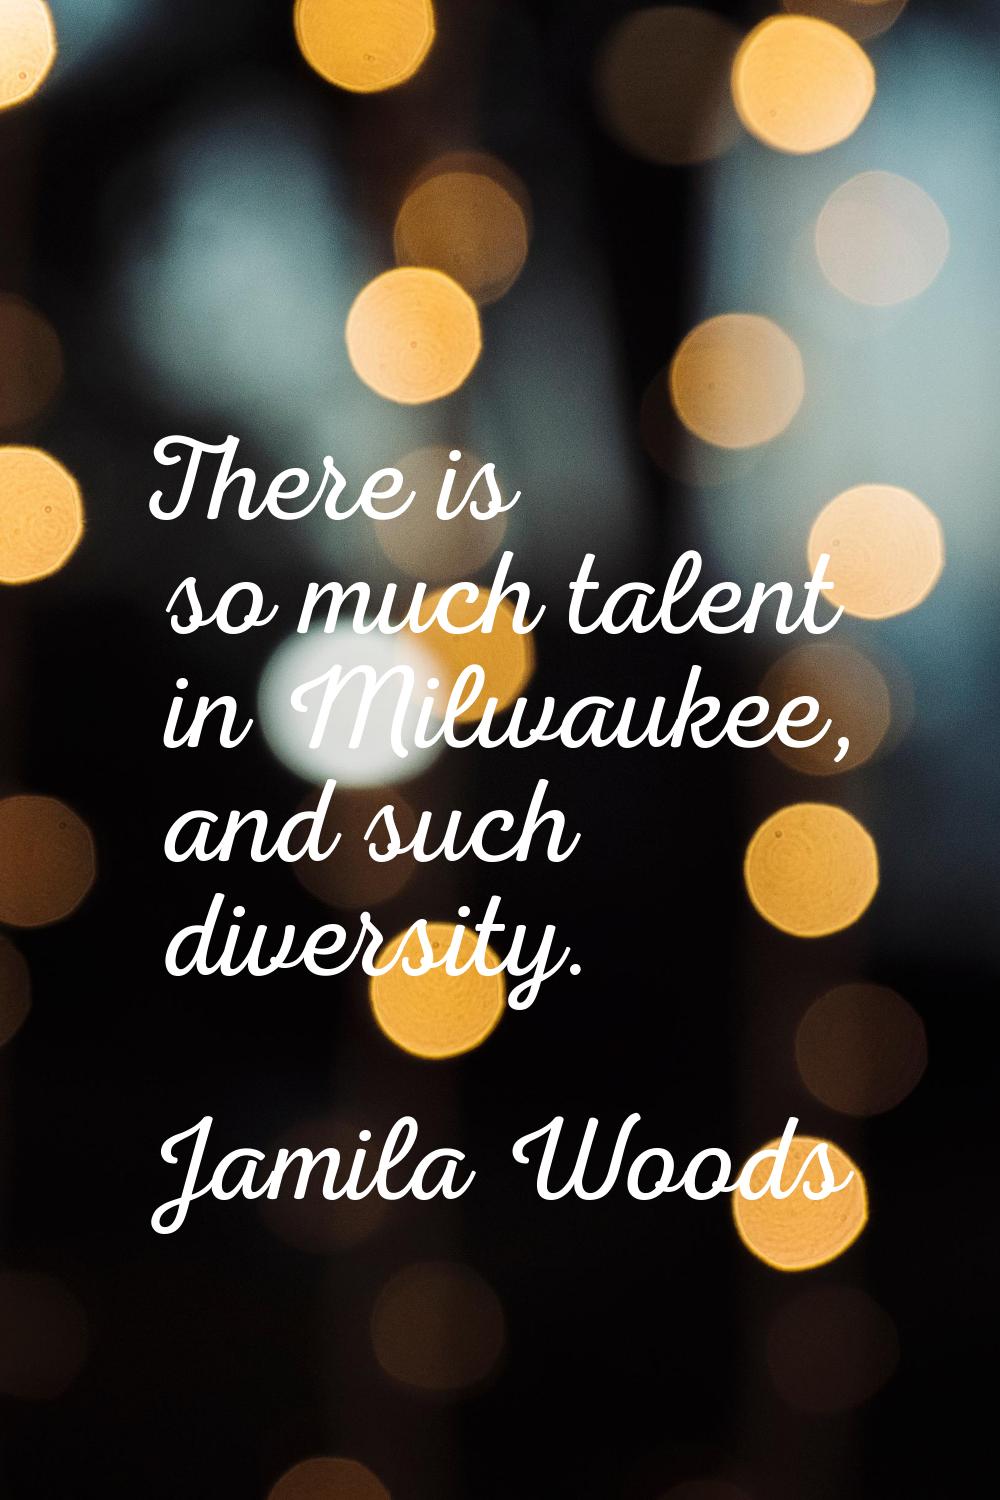 There is so much talent in Milwaukee, and such diversity.